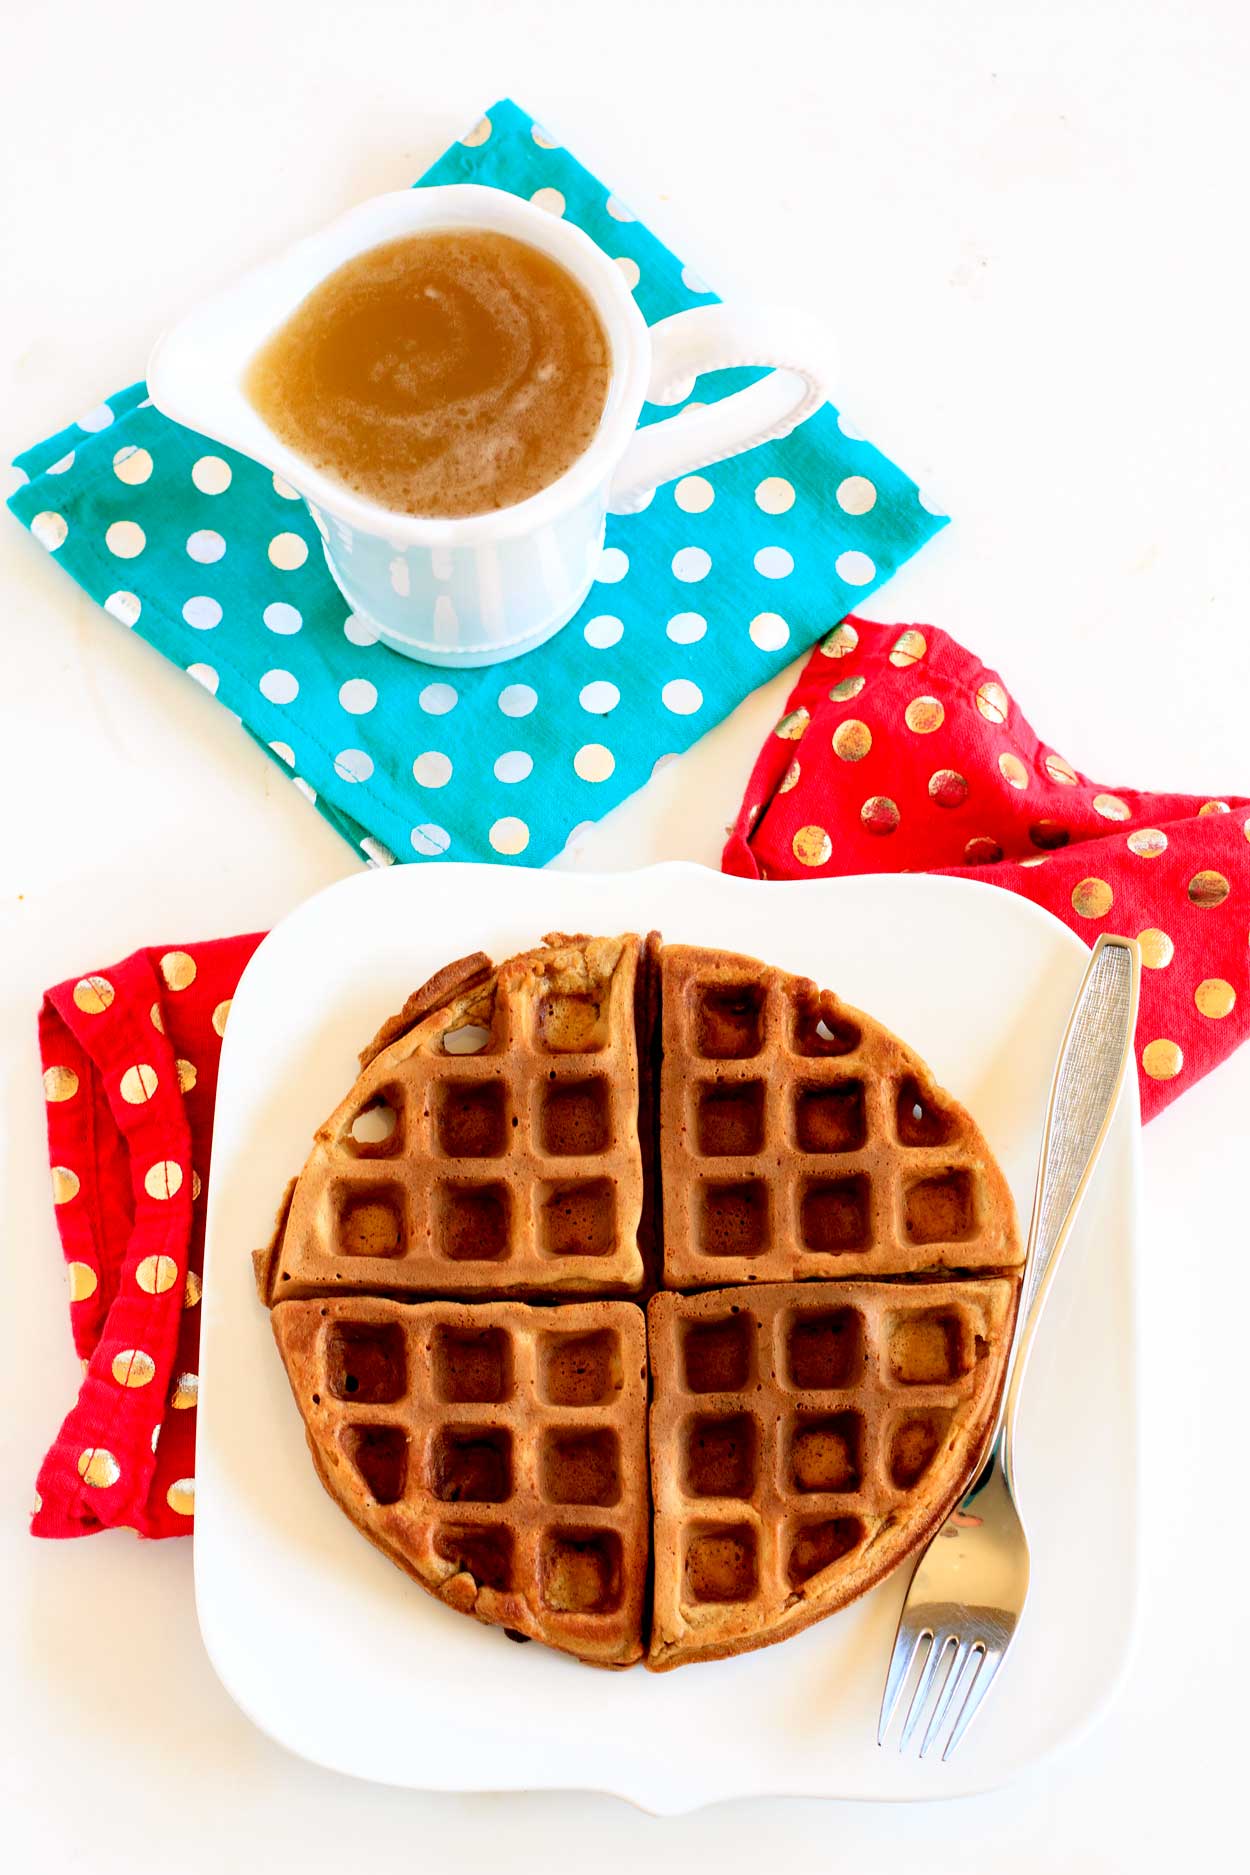 Delicious, homemade Gingerbread Waffles